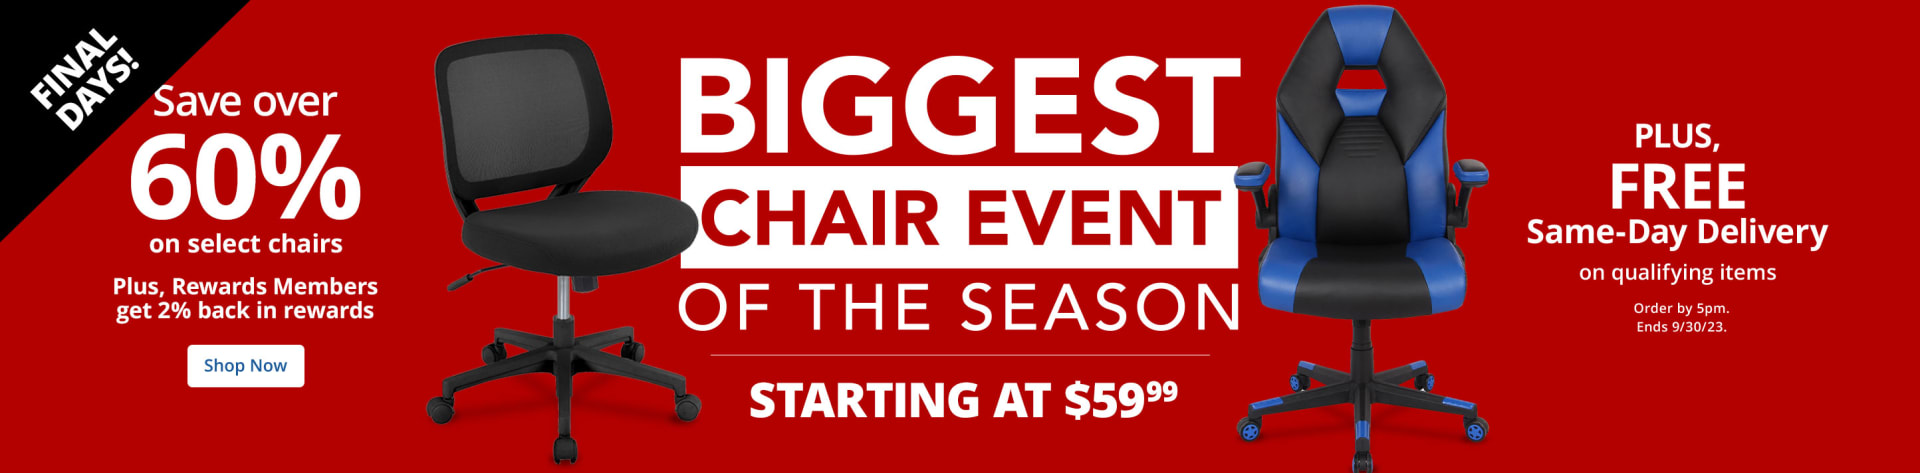 Biggest Chair Event of the Season